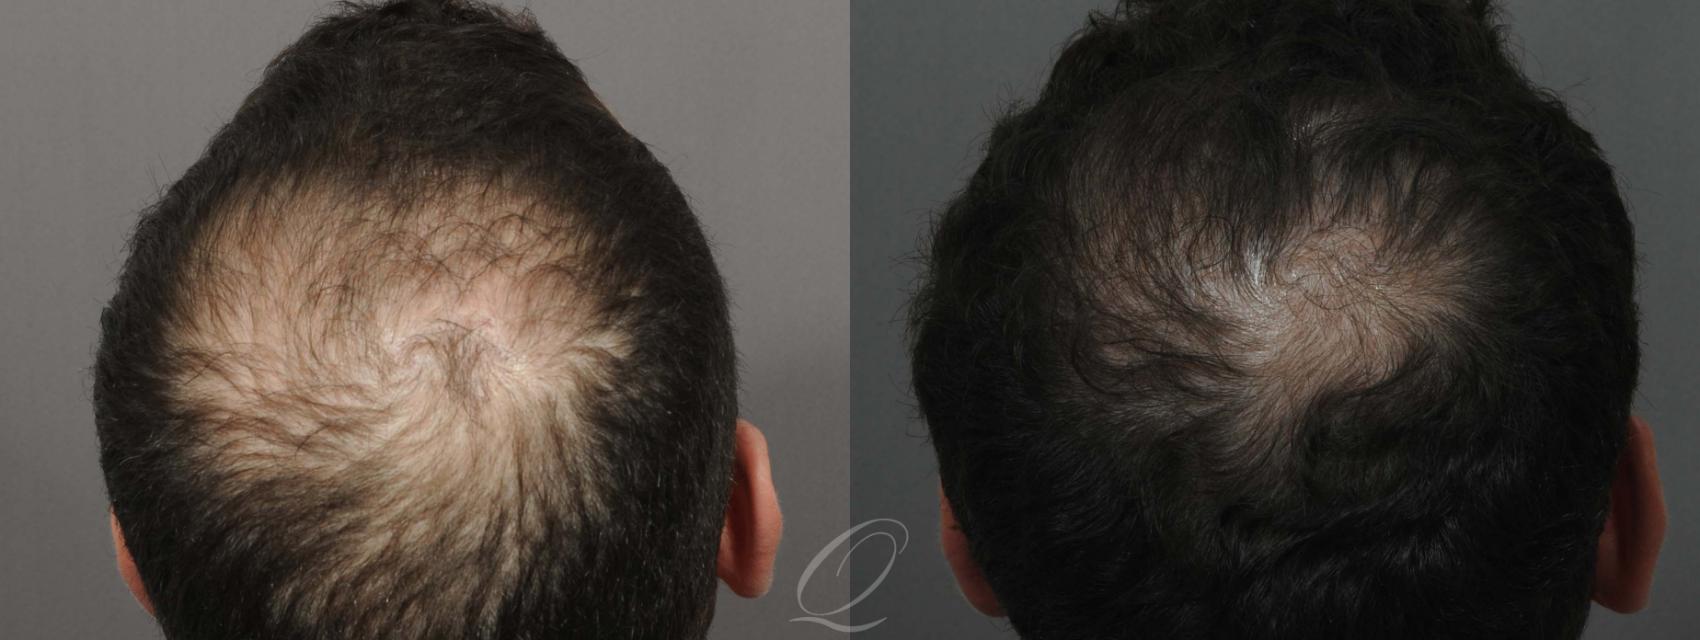 FUT Case 1032 Before & After View #1 | Rochester, NY | Quatela Center for Hair Restoration